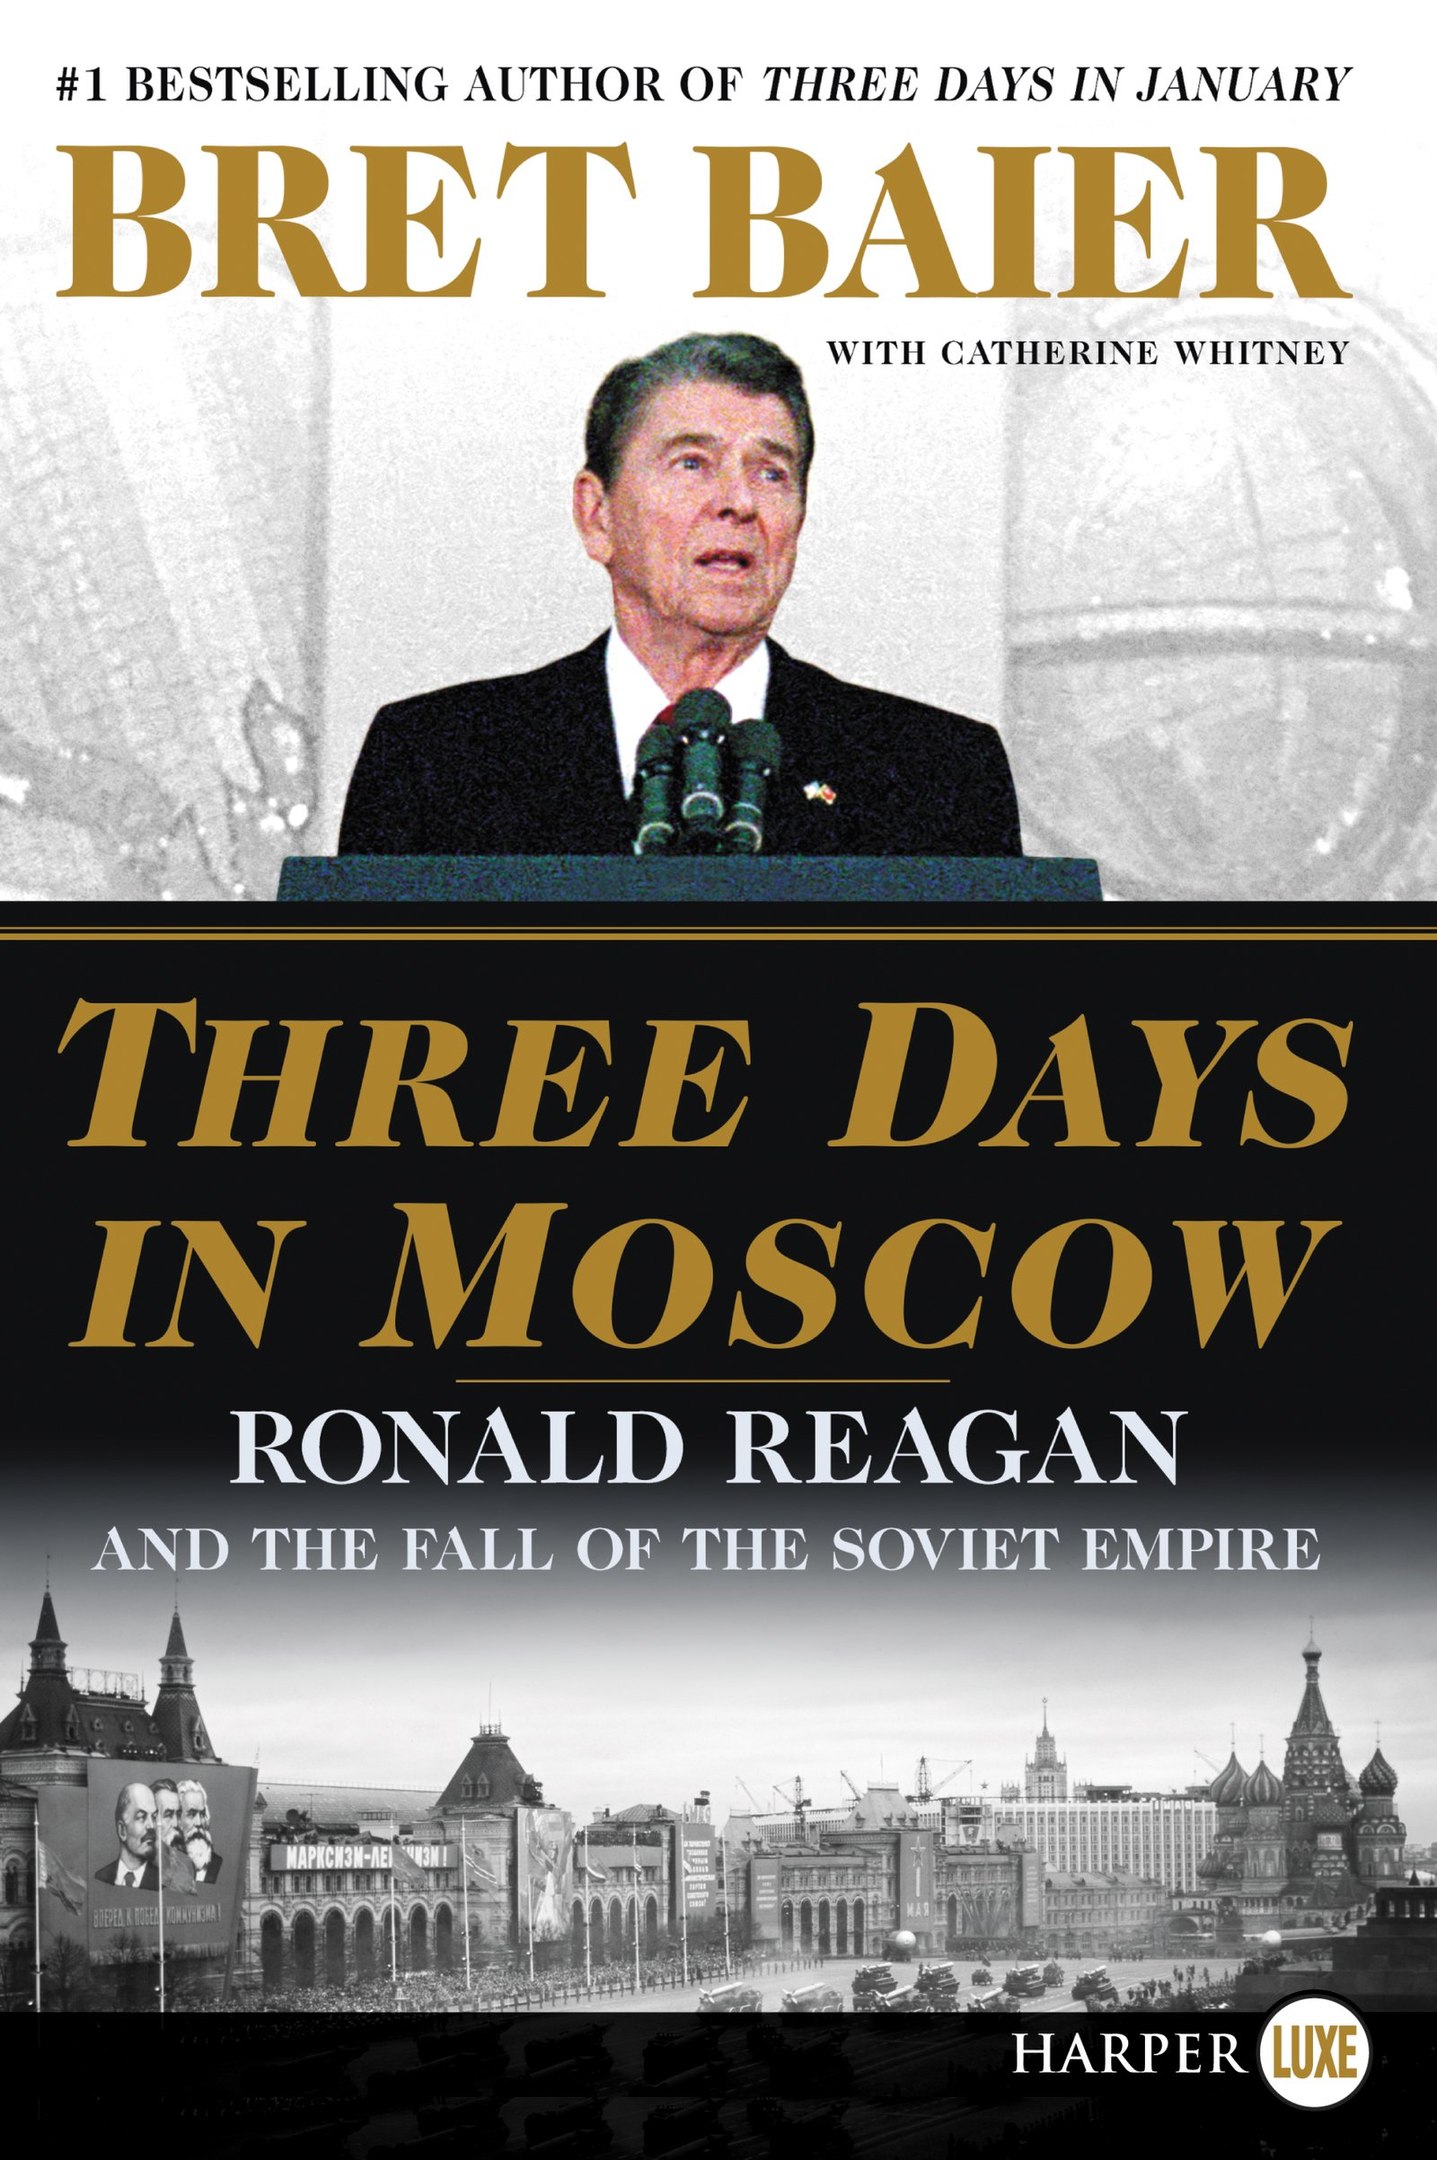 Bret Baier, Catherine Whitney – Three Days In Moscow